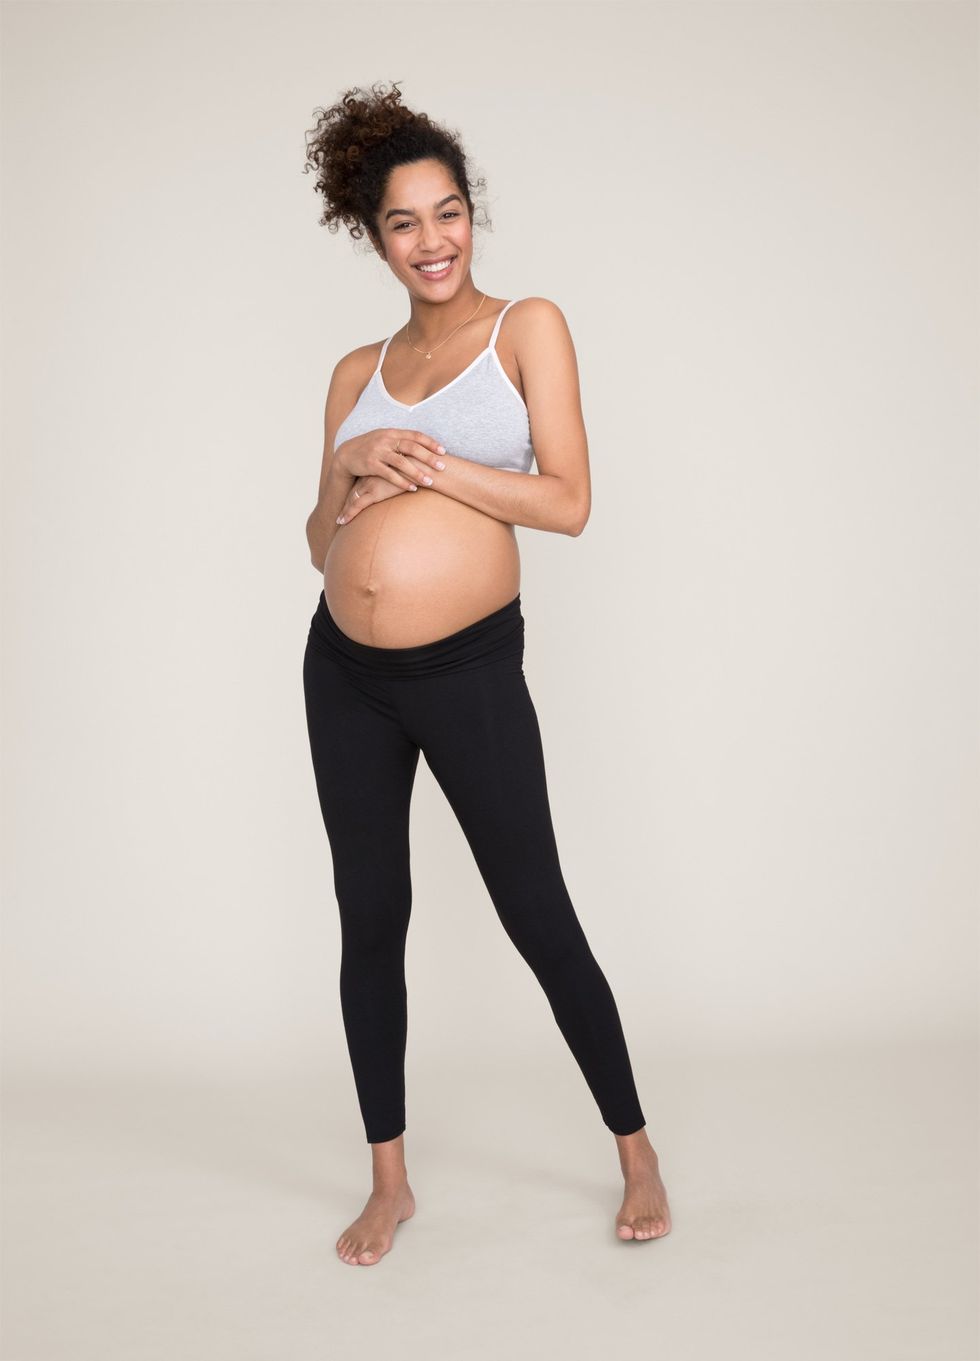 The Yoga Pant: 10 Reasons They're Great for Pregnant women